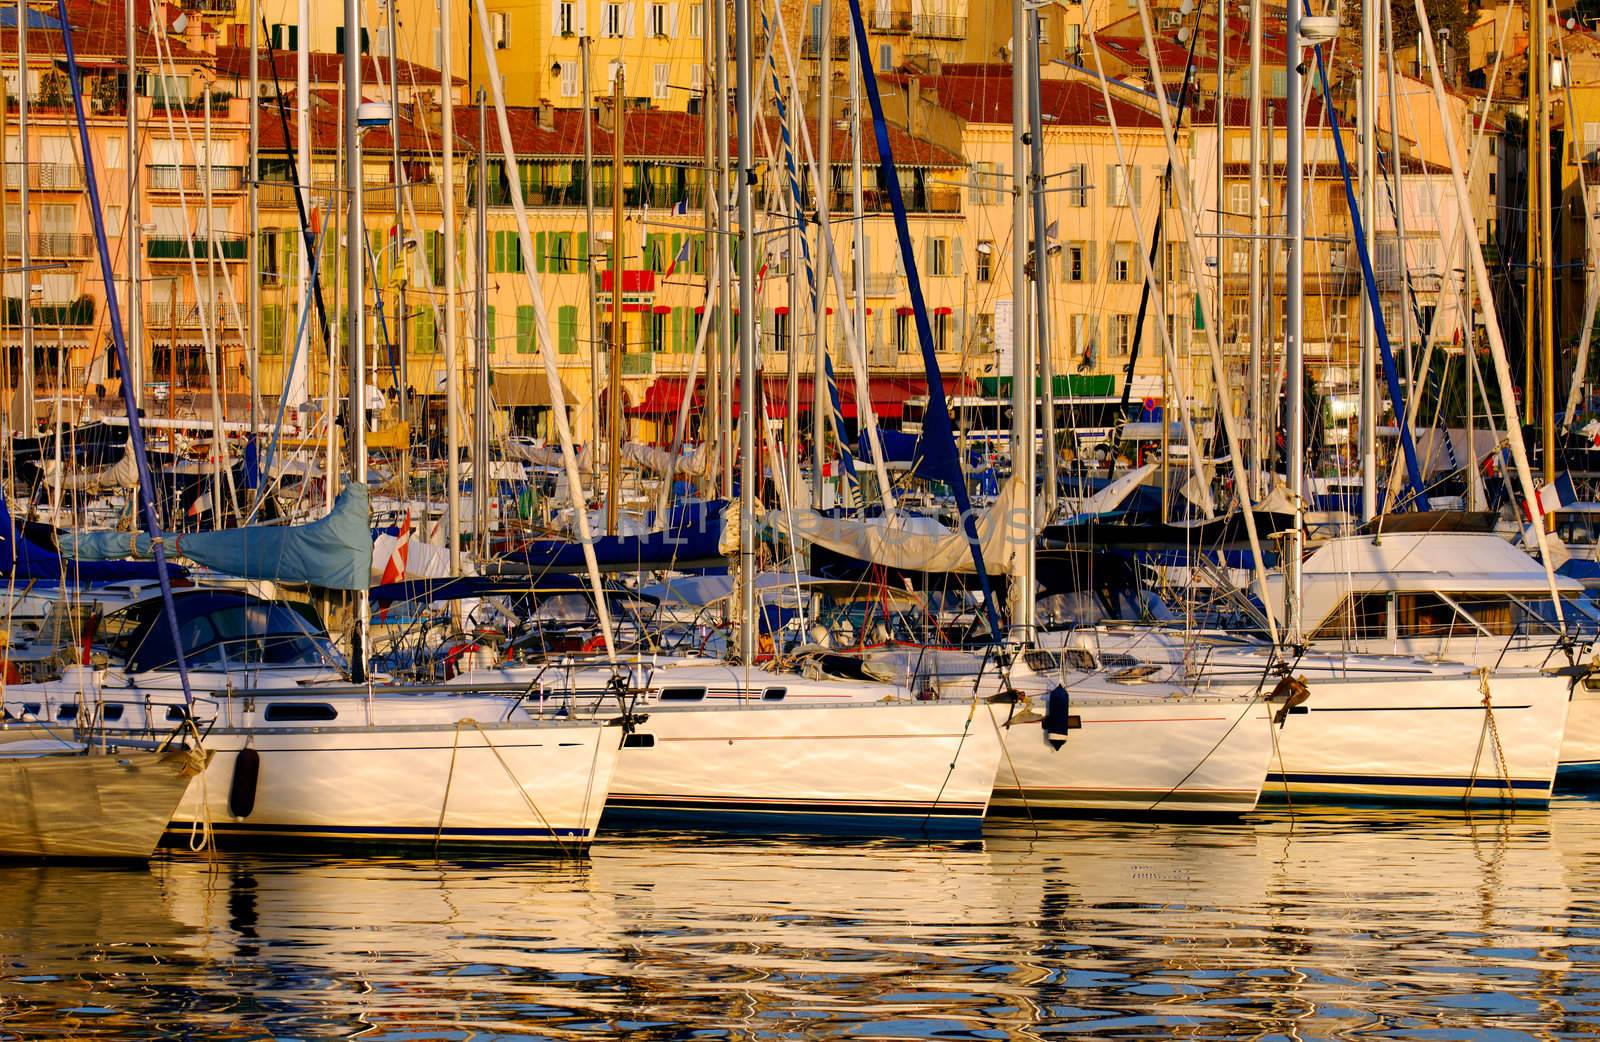 The Vieux Port (old port) in the city of Cannes in the French riviera, as the first rays of the morning sun illuminate the marina and the buildings behind the boats. 